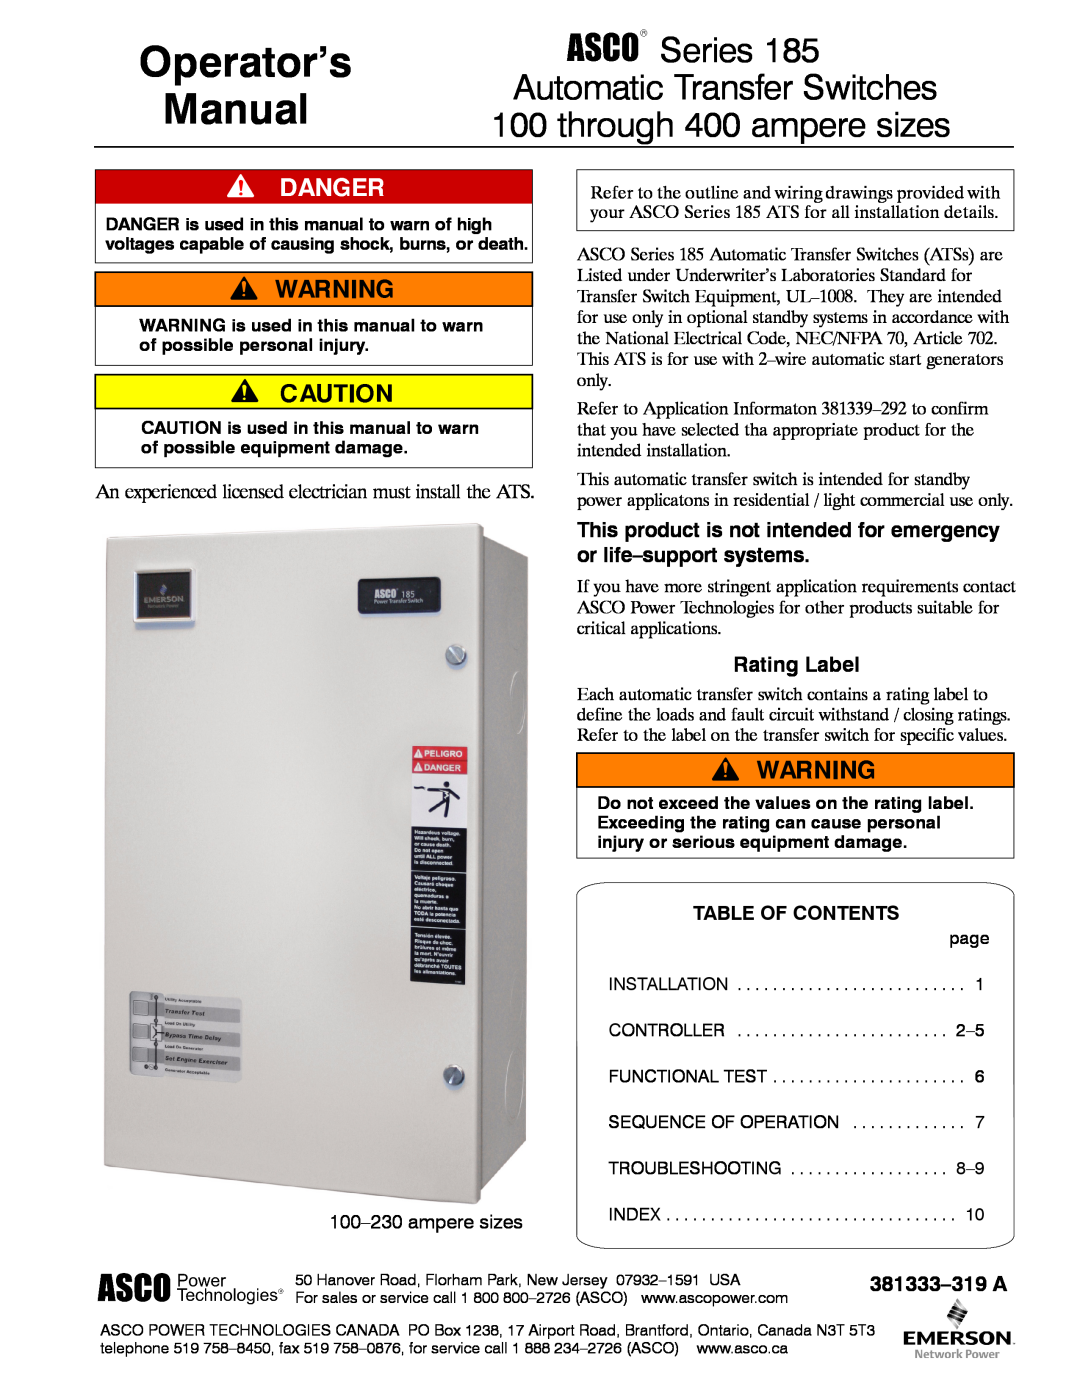 Emerson 185 manual This product is not intended for emergency or life-support systems, Rating Label, Operator’s Manual 